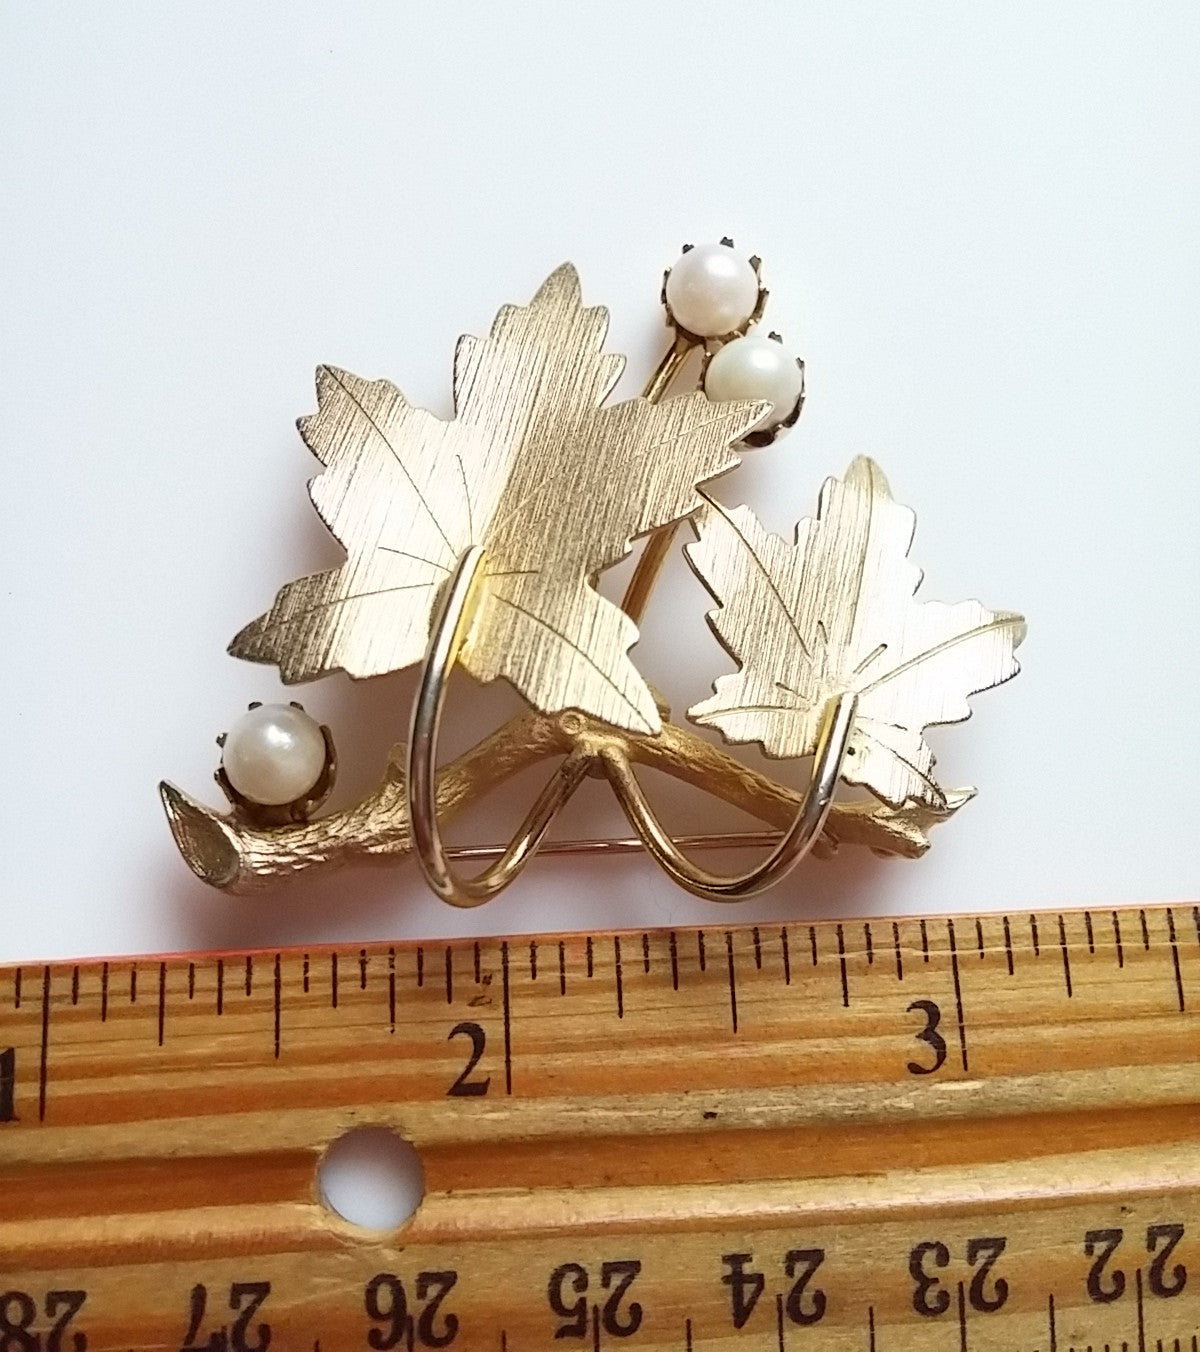 Vintage Sarah Coventry 1964 "Precious" Gold Branch and Leaf and Pearl Pin Brooch - Dirty 30 Vintage | Vintage Clothing, Vintage Jewelry, Vintage Accessories